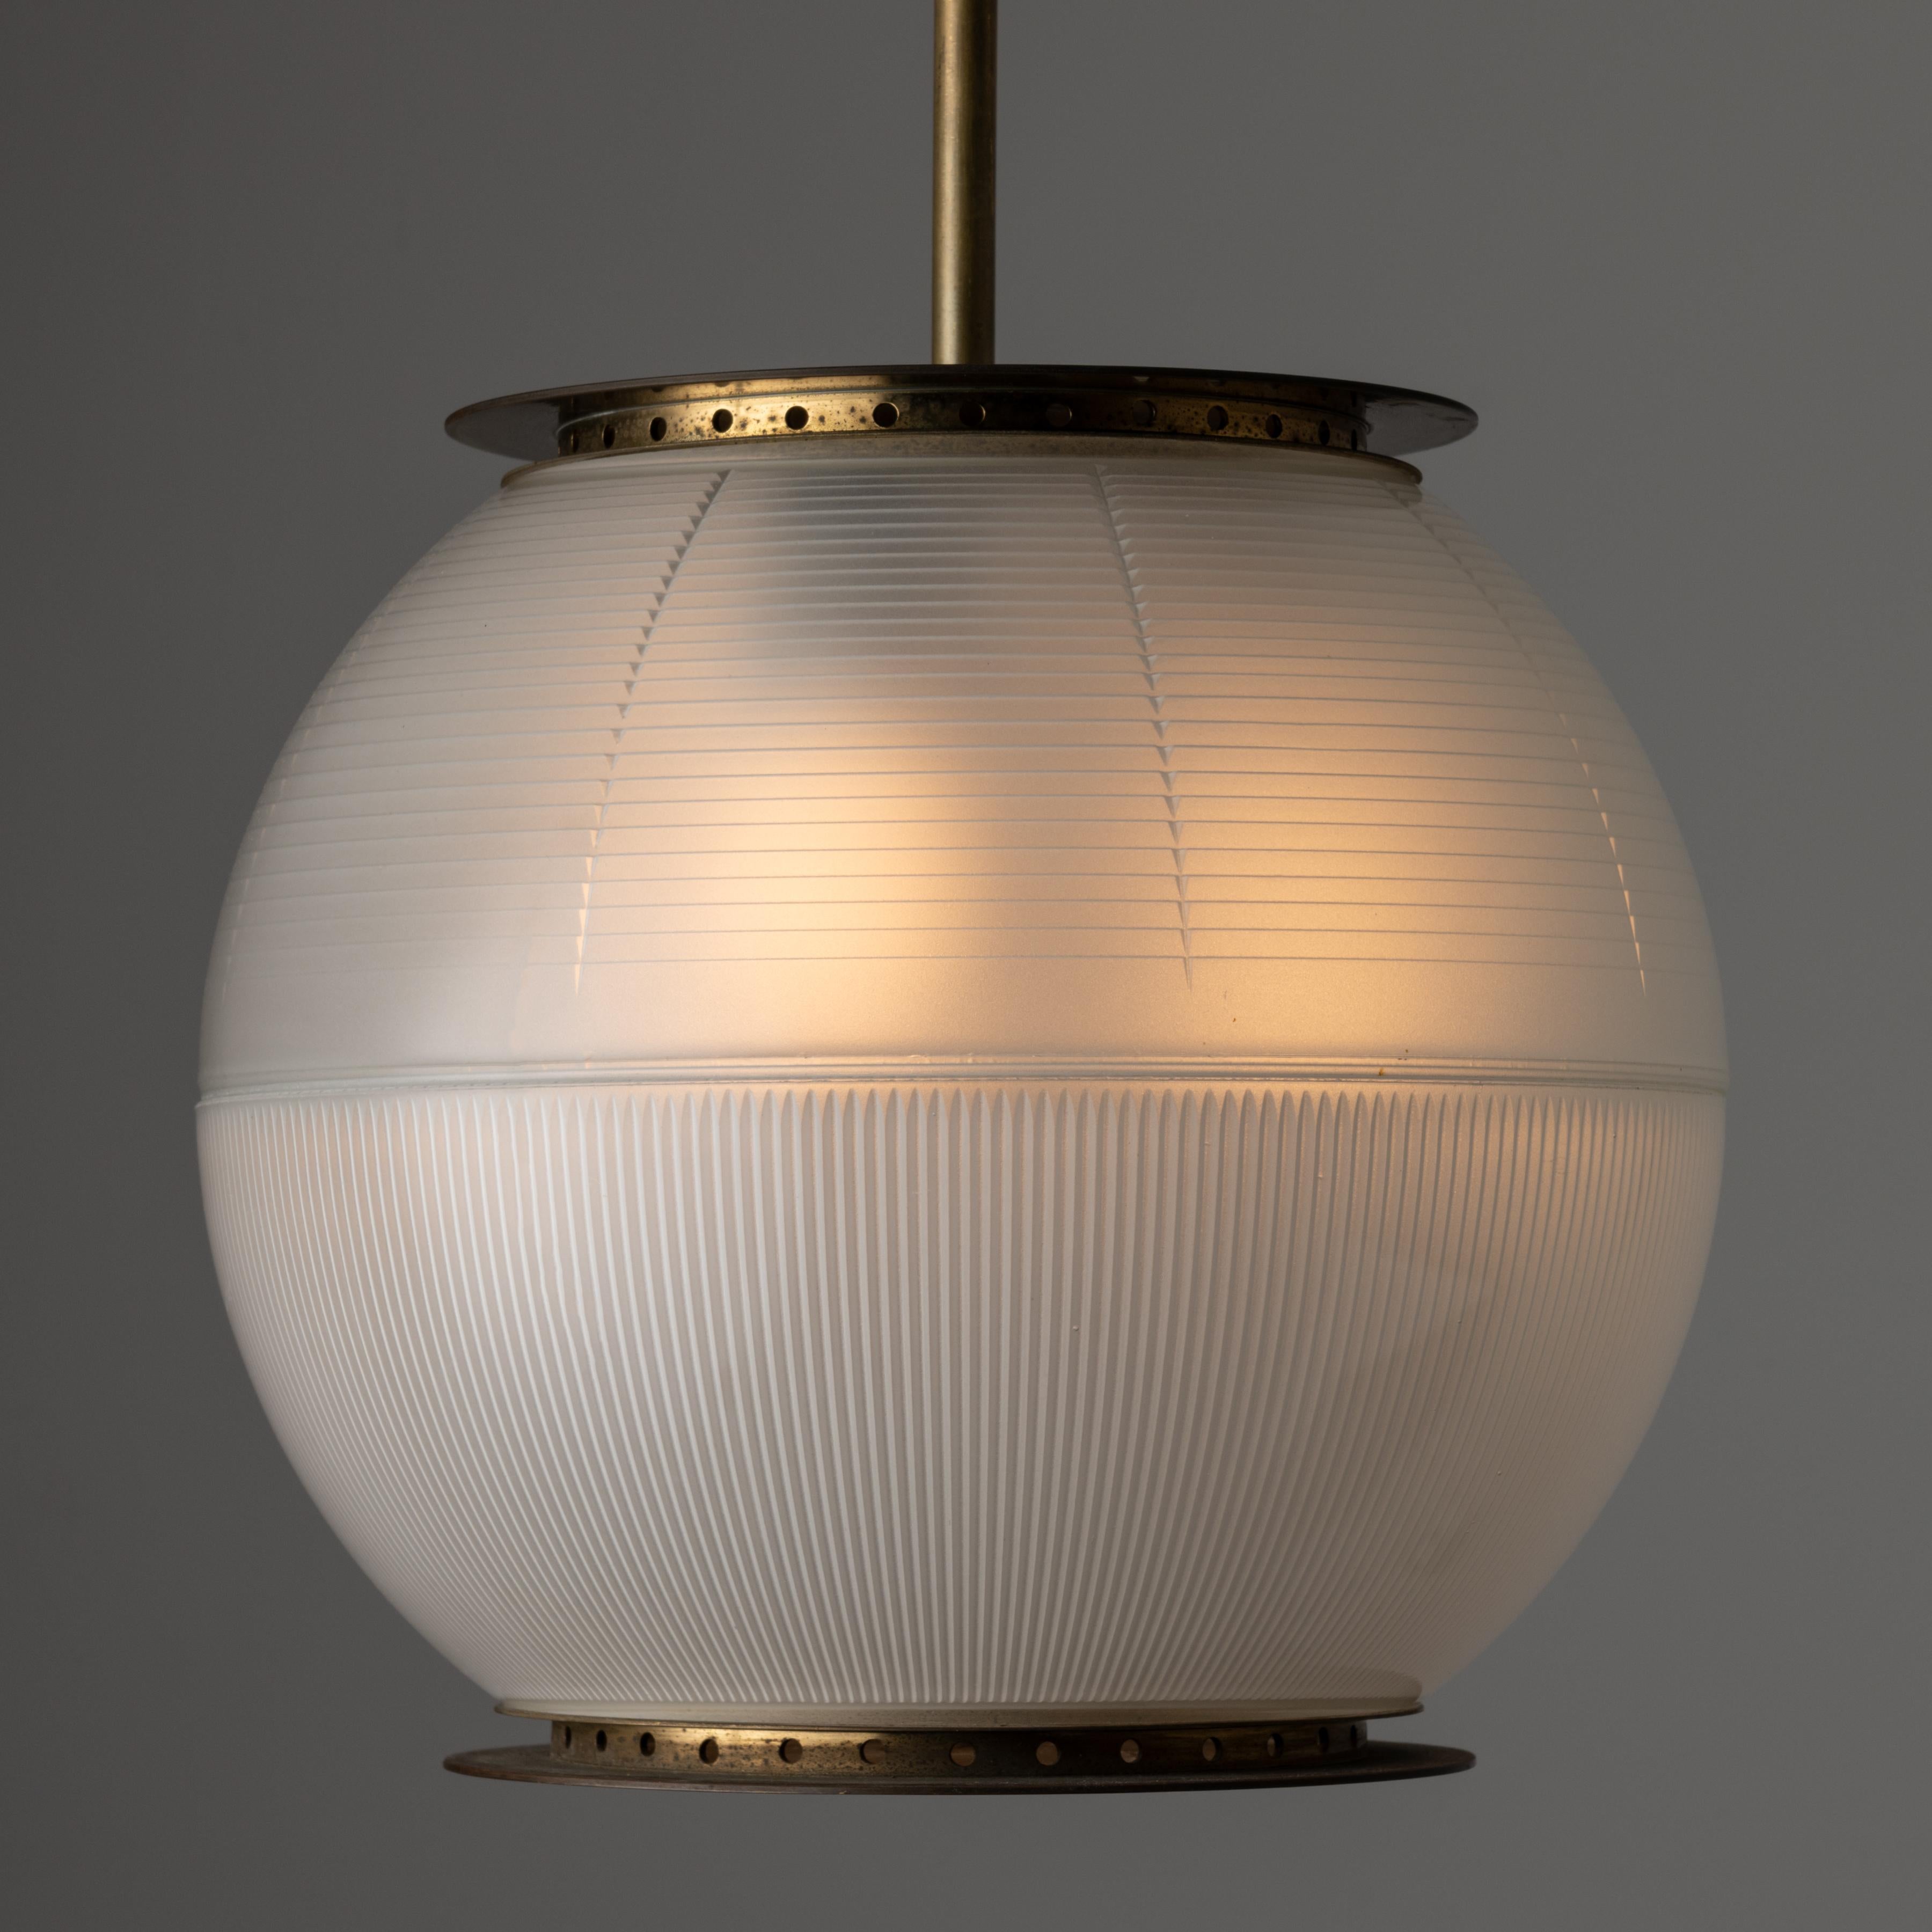 LS4 'Doppio Vetro' Ceiling Light by Ignazio Gardella for Azucena. Manufactured in Italy, in 1955. Iconic and eye-focused glass pendant comprising of a halophane double cupped diffuser, paired with an aged brass stem. The light holds a tri-socket,